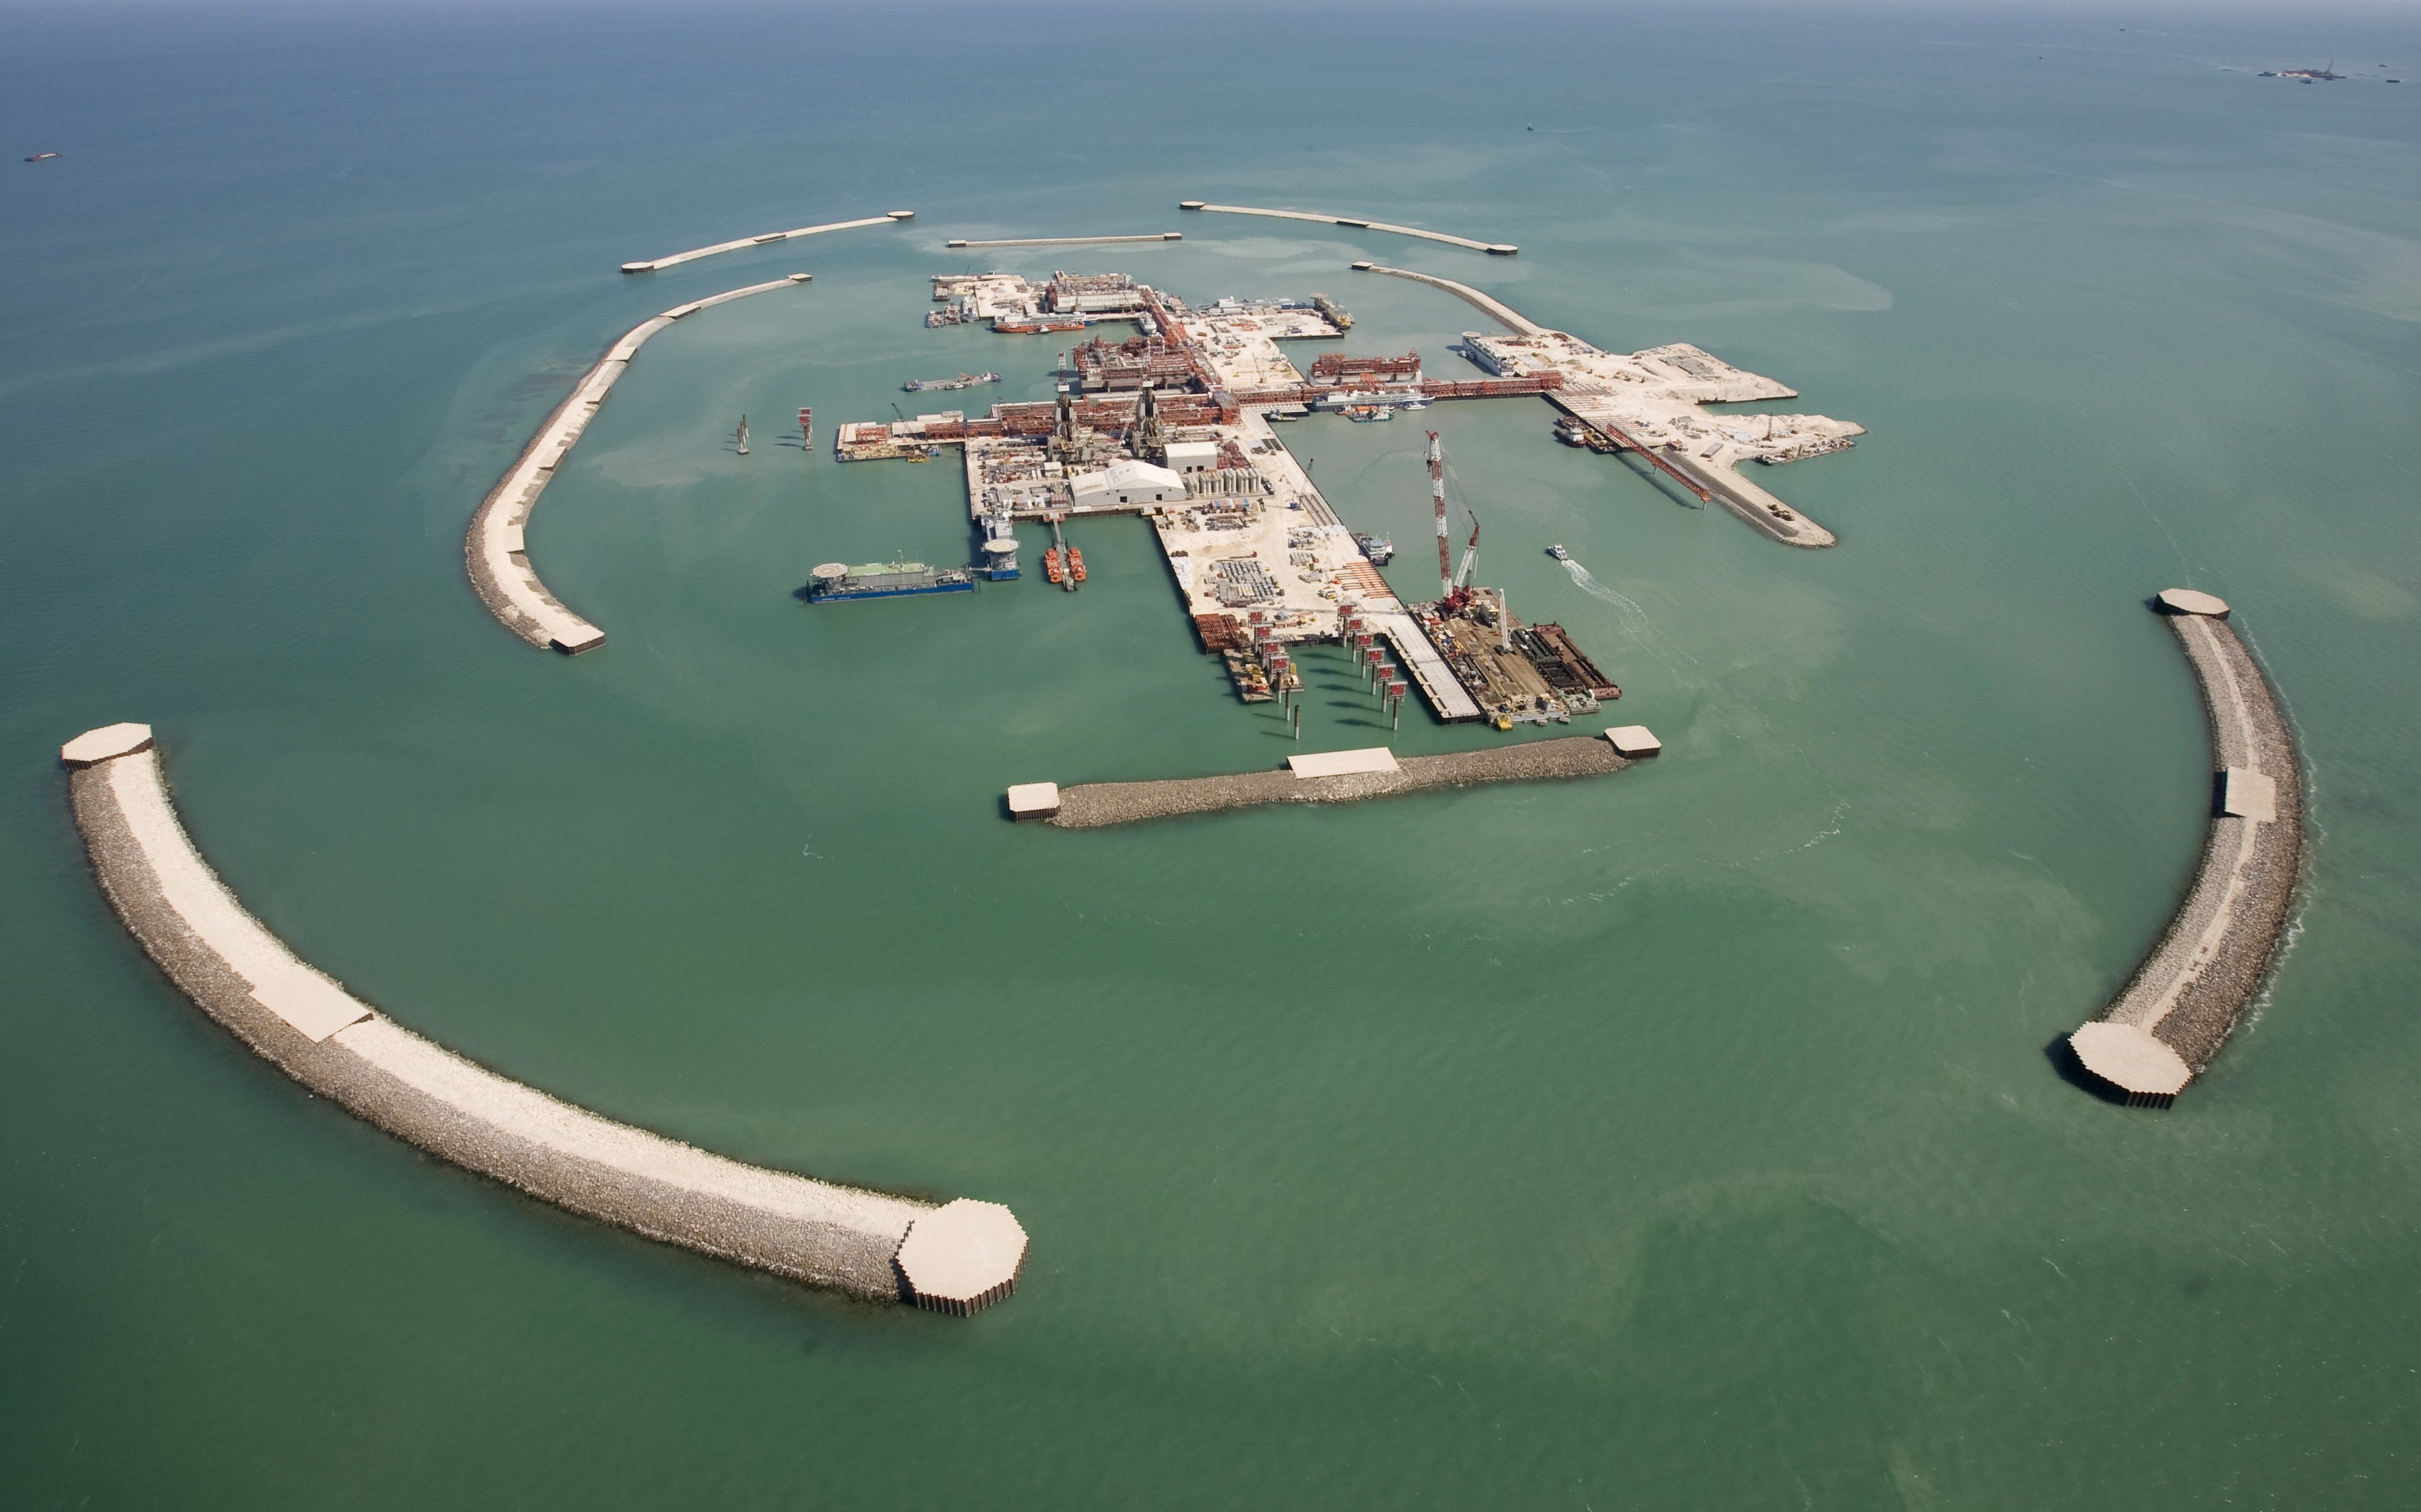 An artificial island at the Kashagan oil project in the Caspian Sea. Photo: Reuters